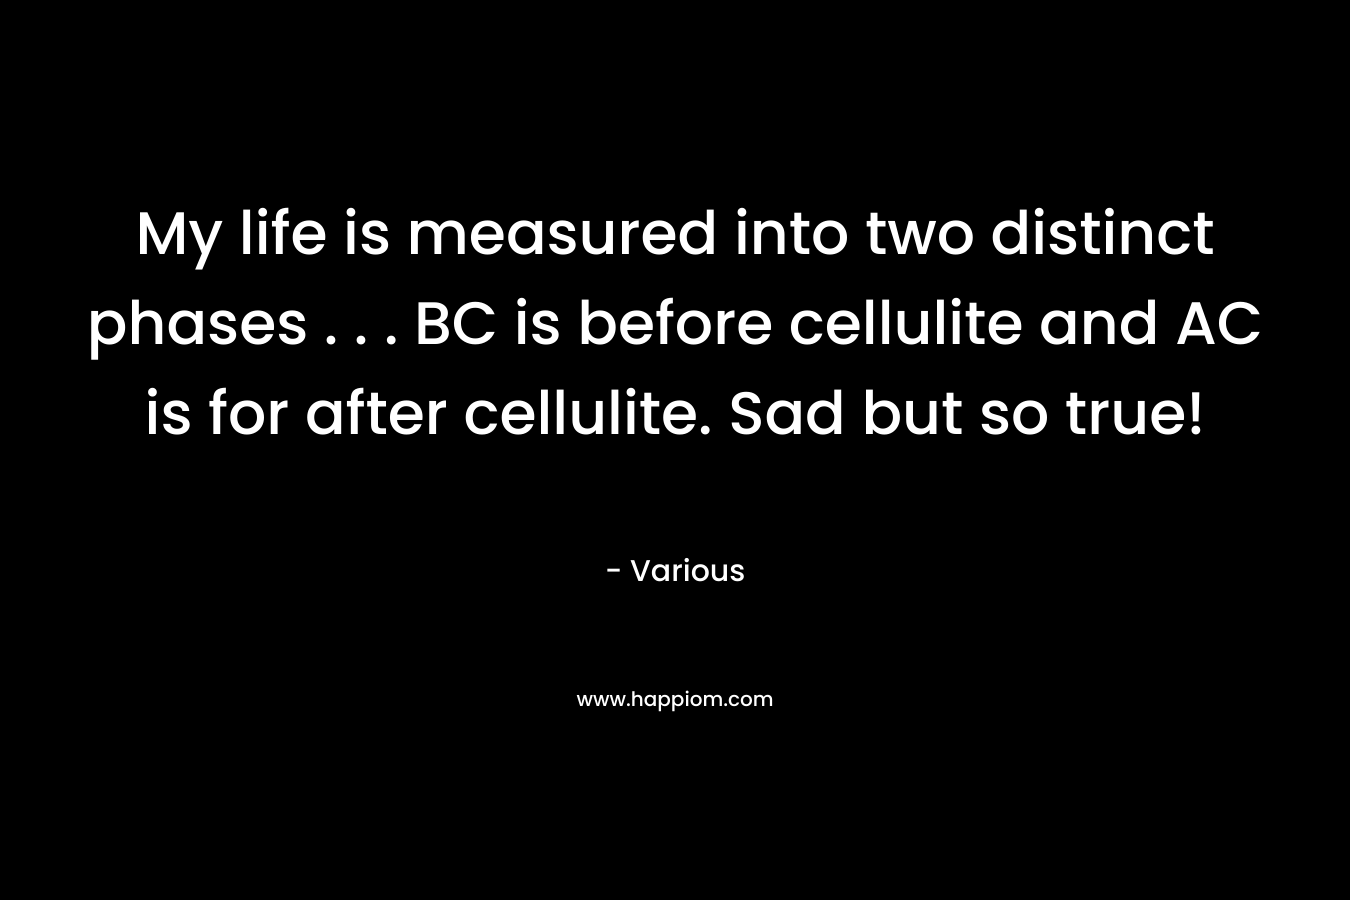 My life is measured into two distinct phases . . . BC is before cellulite and AC is for after cellulite. Sad but so true!